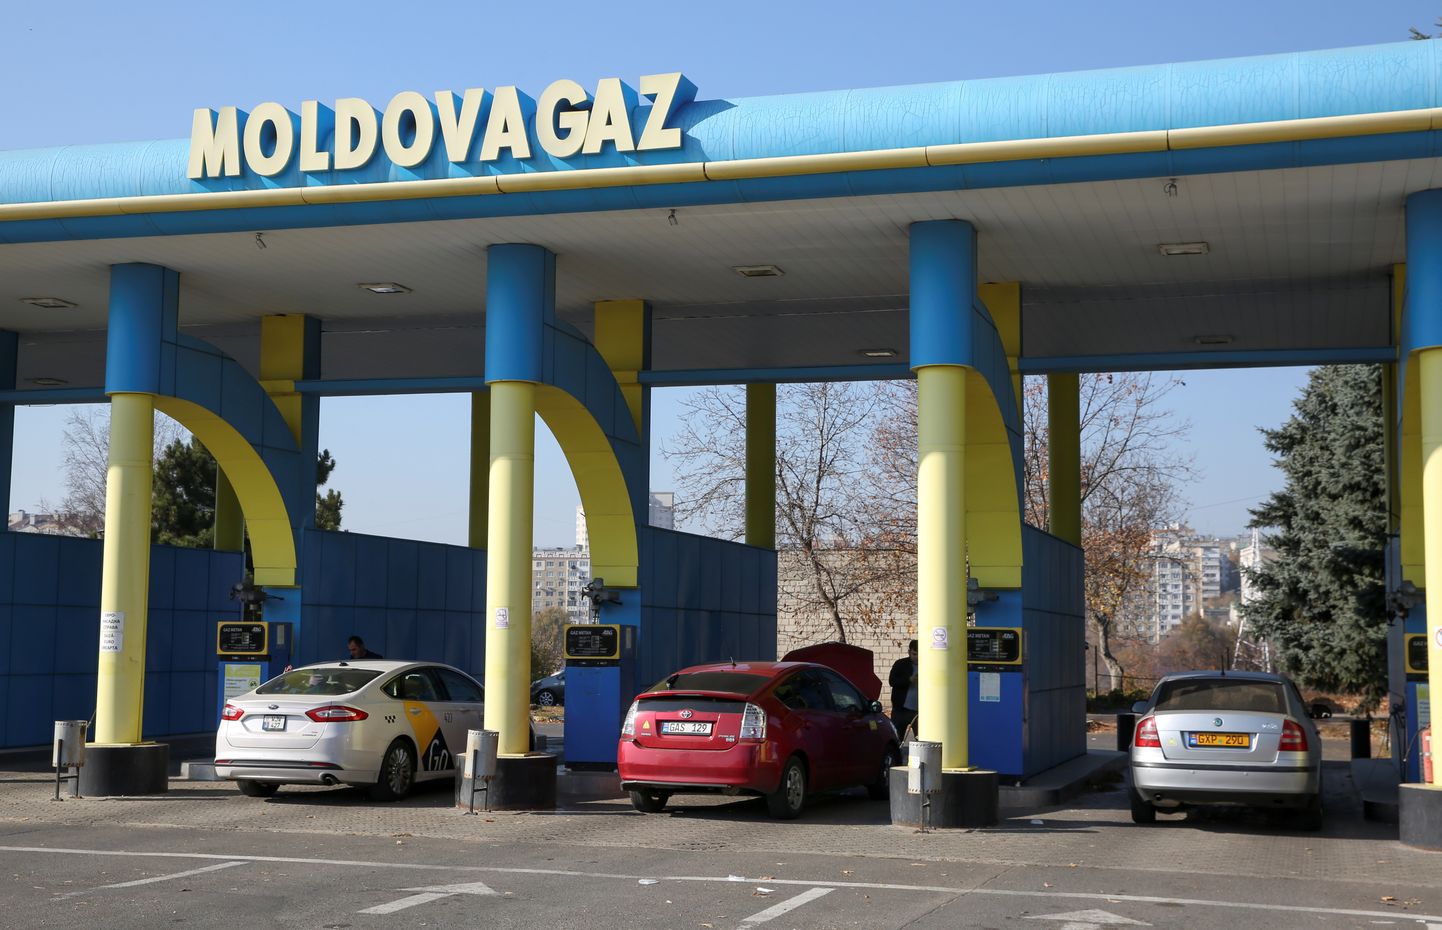 The logo of Moldovagaz energy company is on display at a gas filling station in Chisinau, Moldova October 28, 2021.